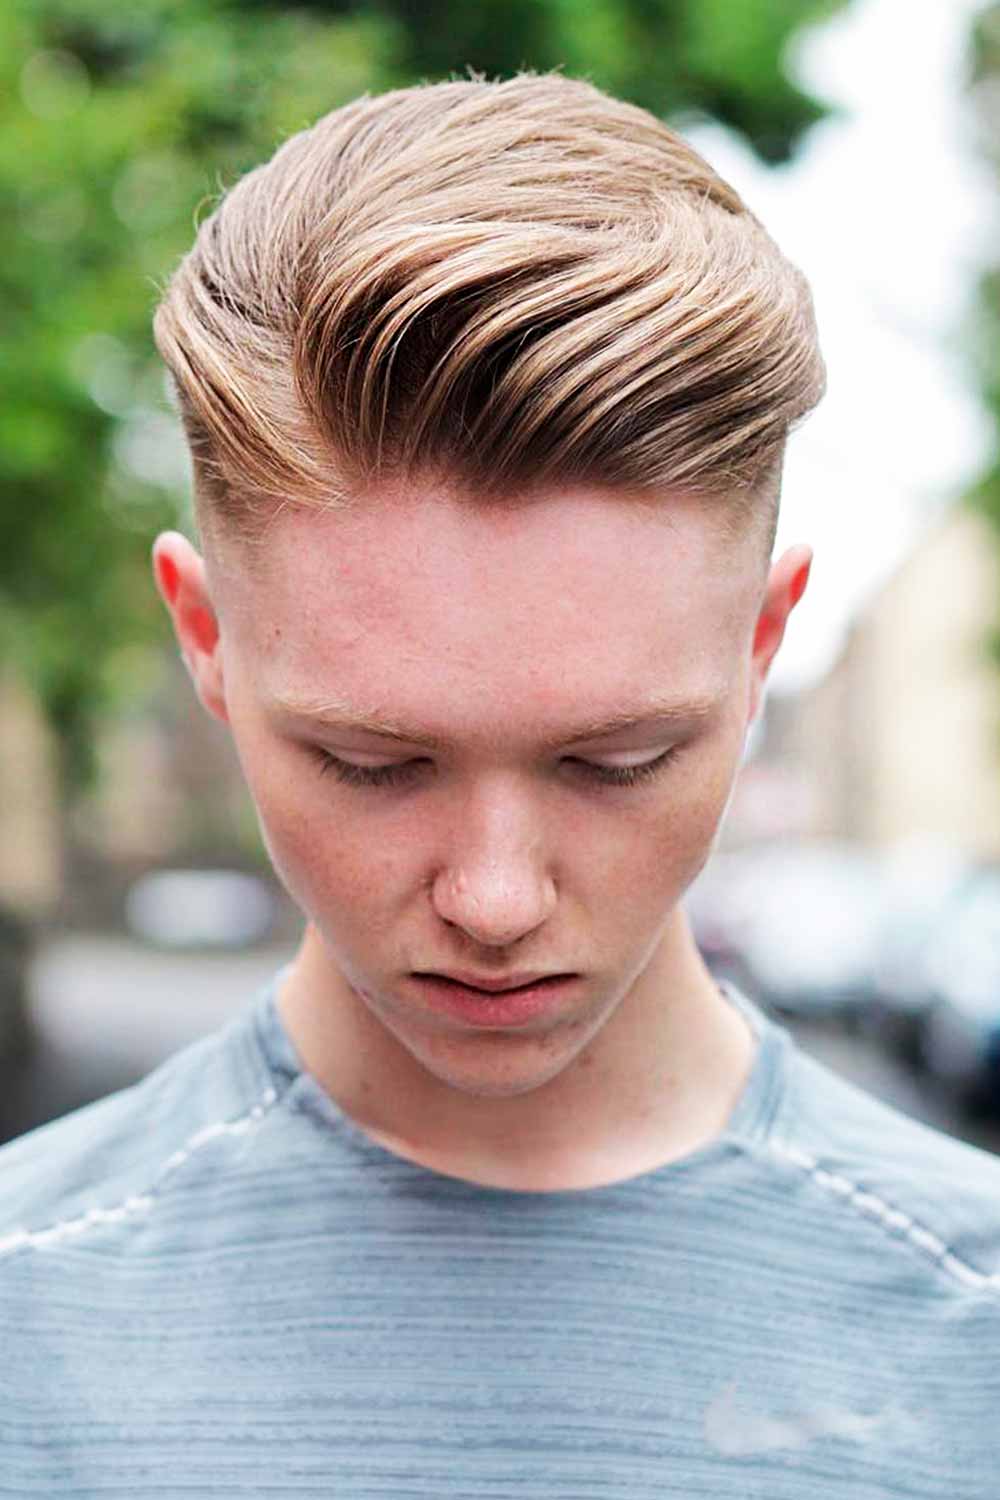 Prom Hairstyle With Side Part #promhairstyles #promhairstylesformen #formalhairstyles #mensformalhairstyles